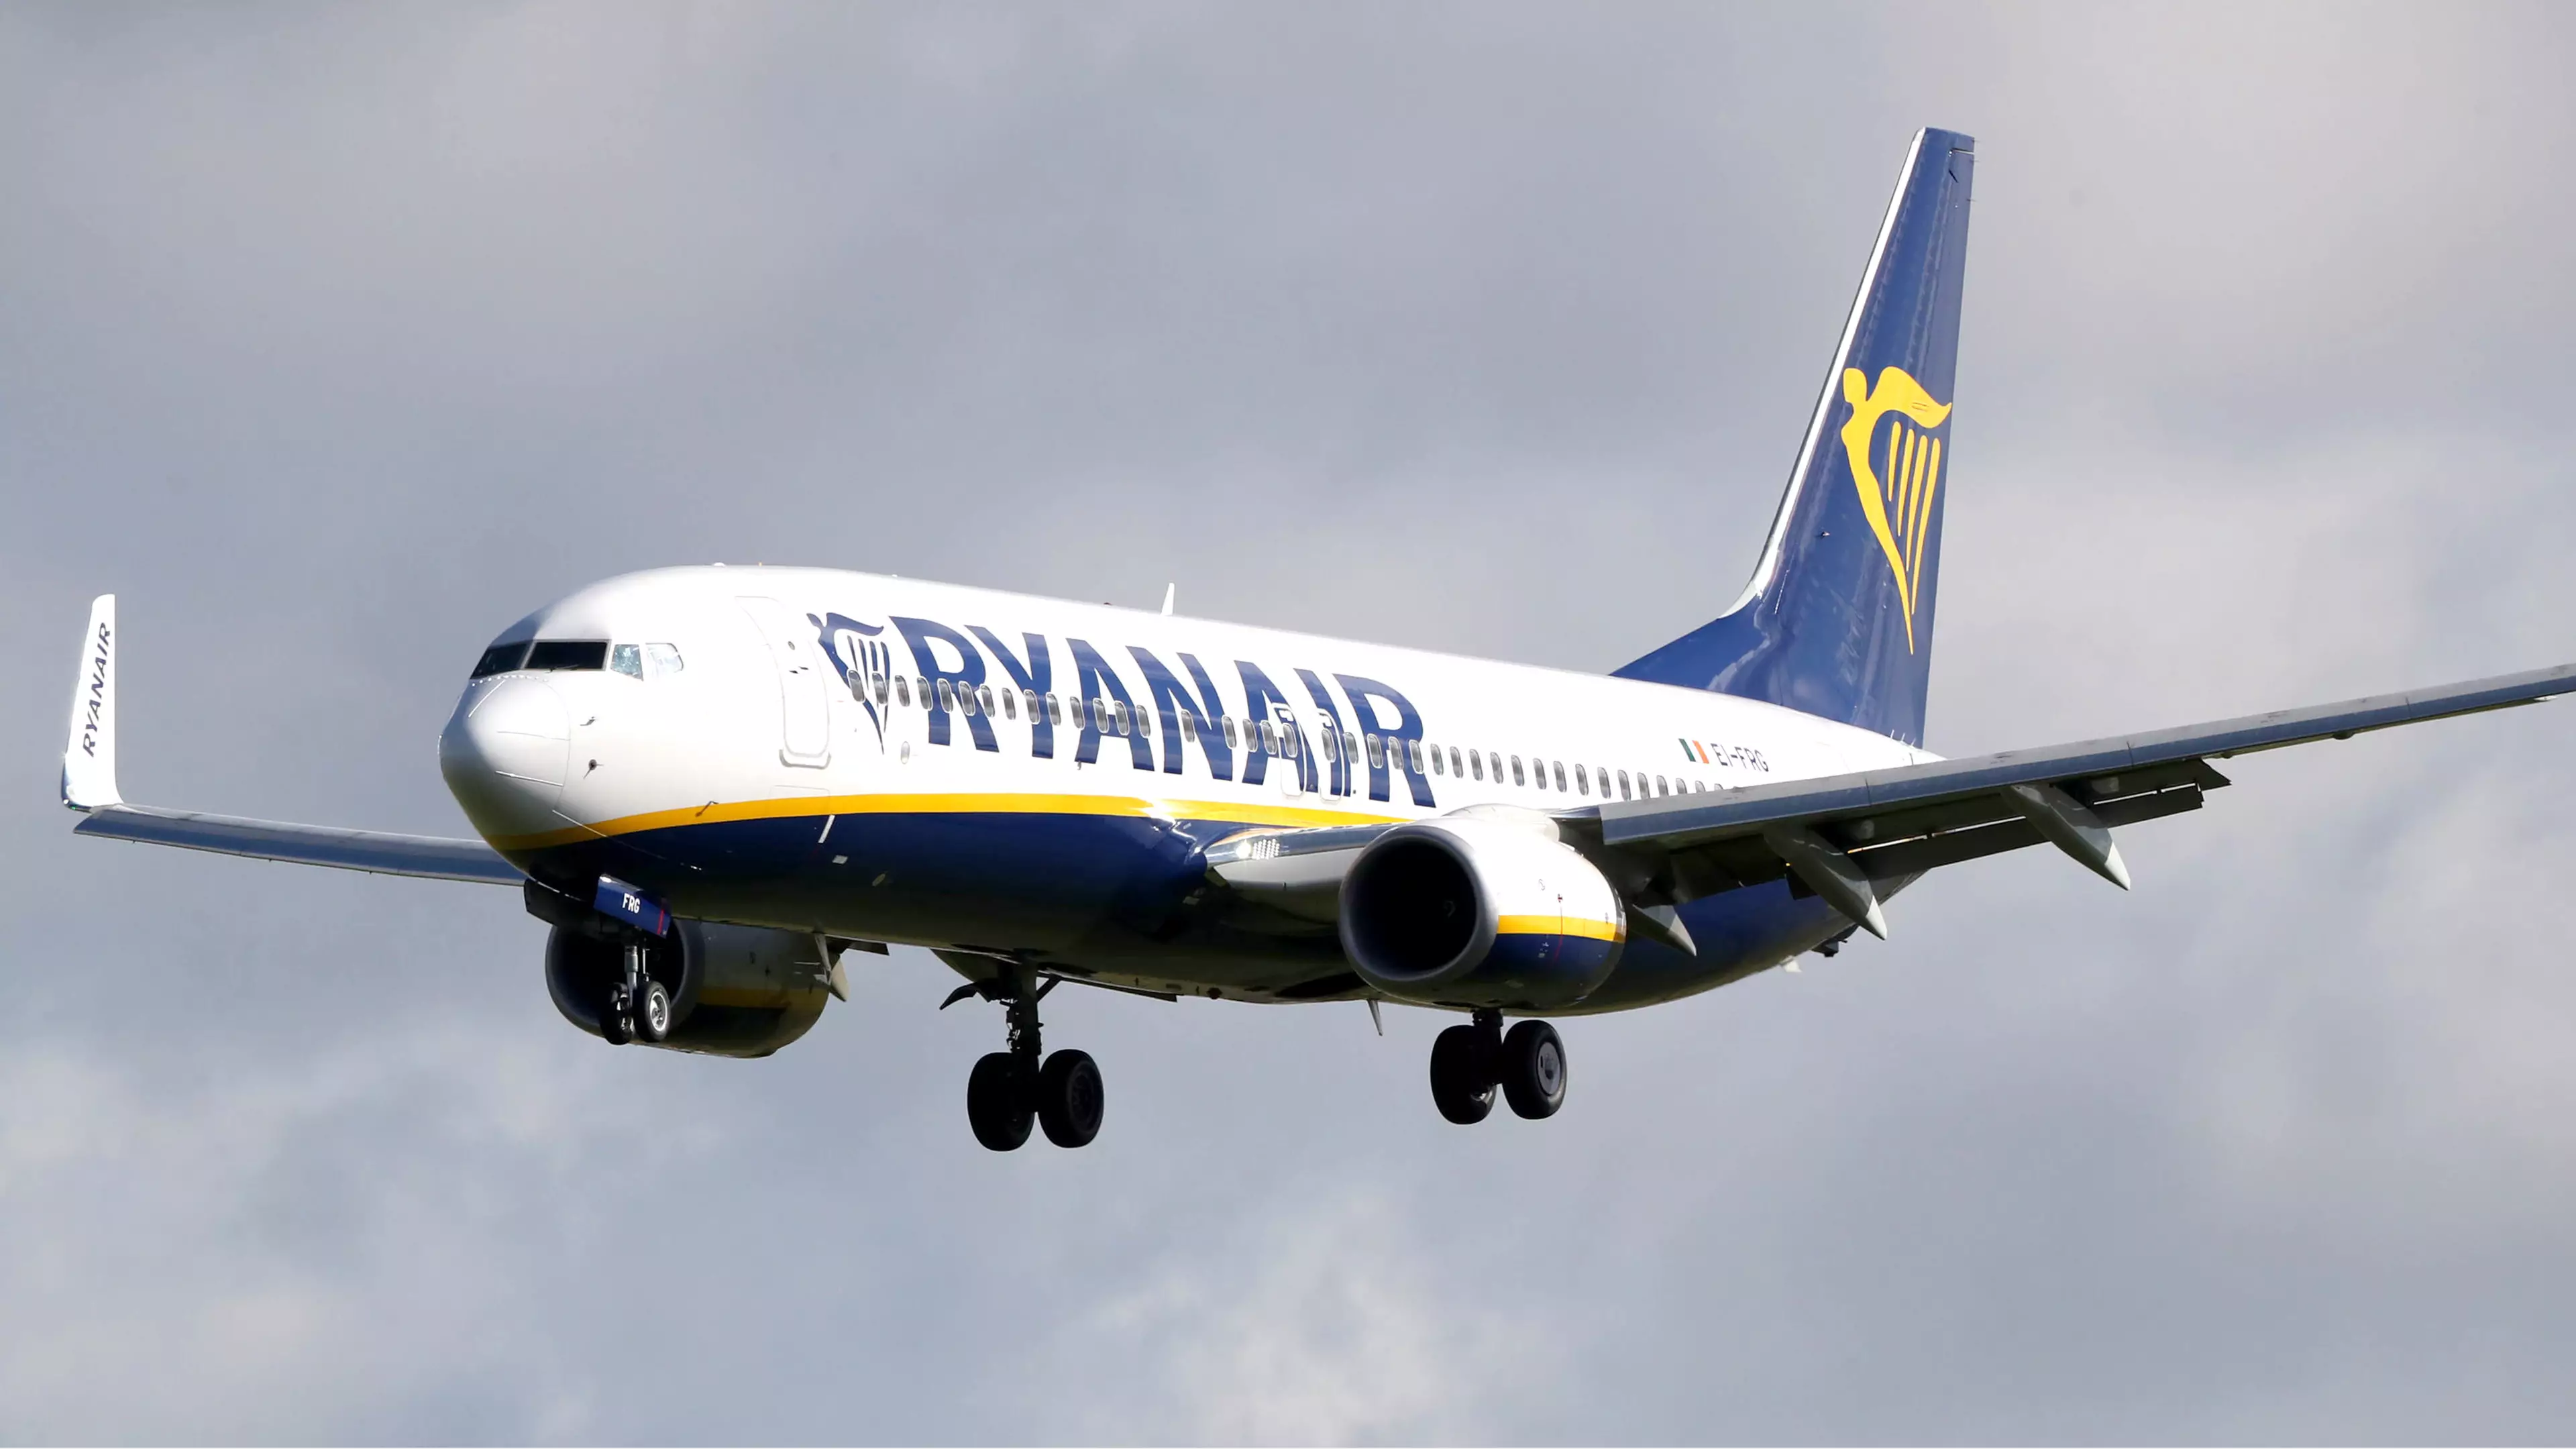 Ryanair Has Launched An Easter Sale With Flights From £4.99